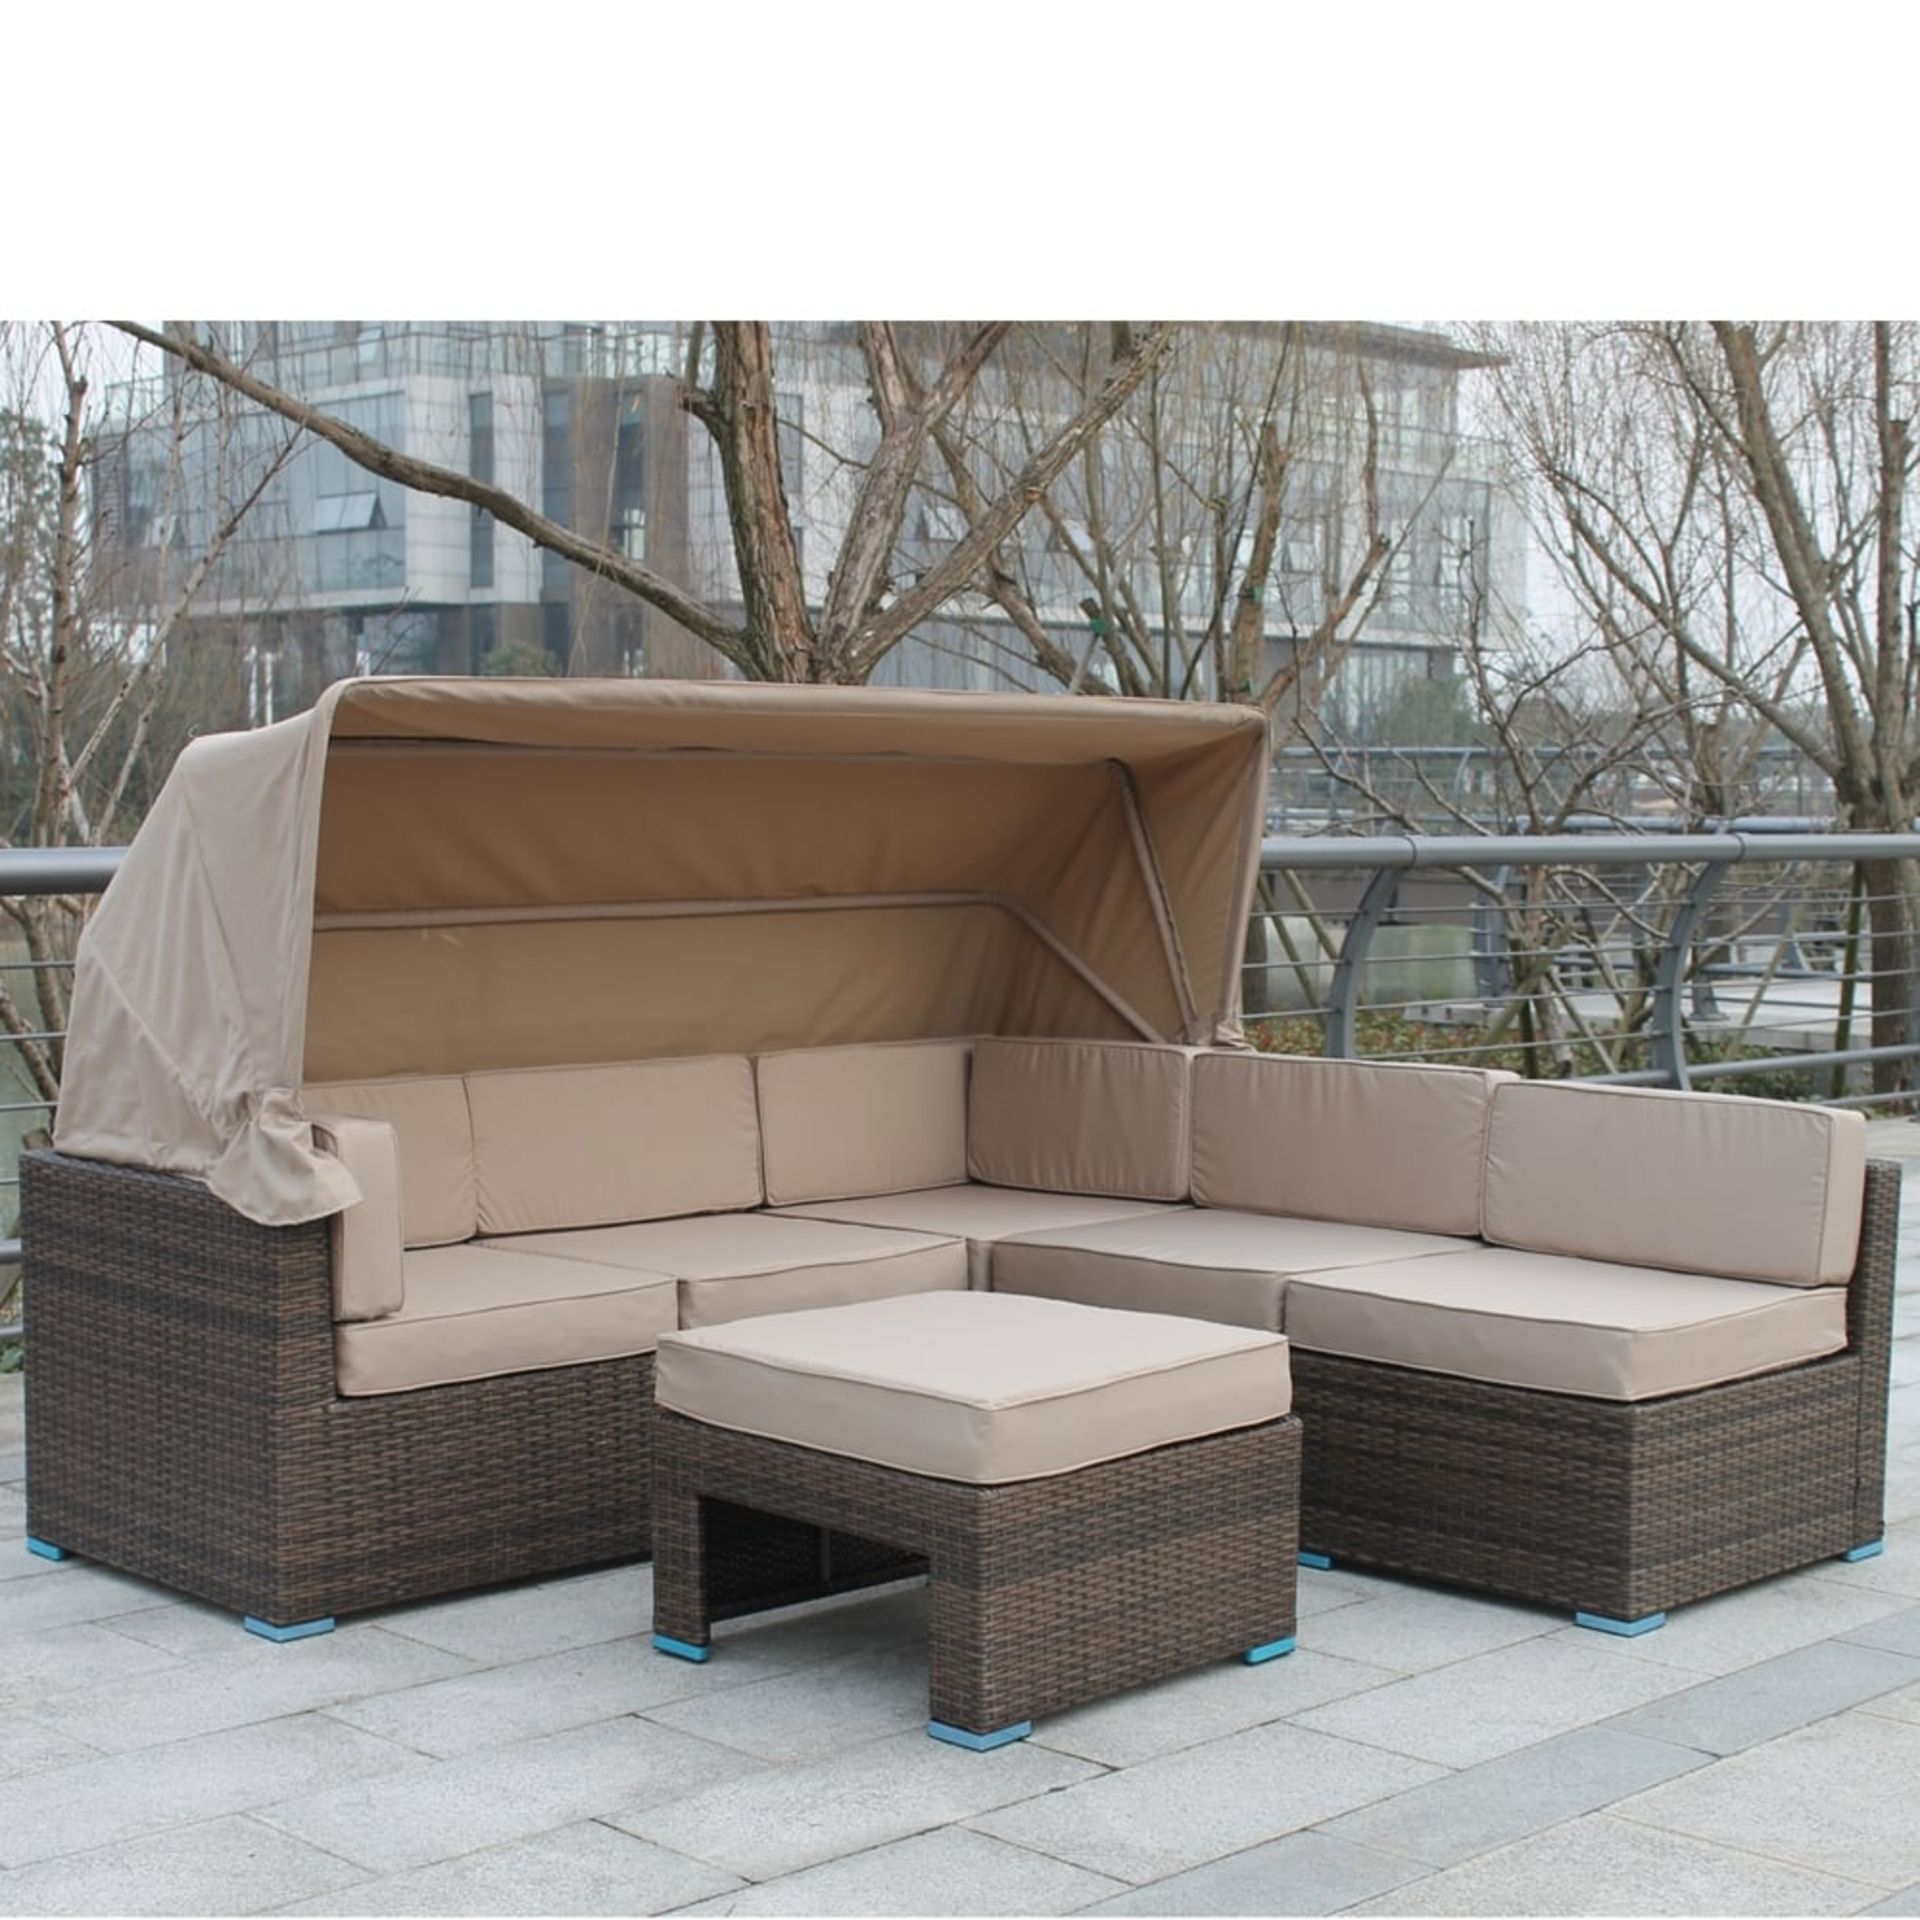 Altrincham Five Seat Rattan Sofa Set with Table new and boxed multi brown pu rattan. - Image 2 of 3